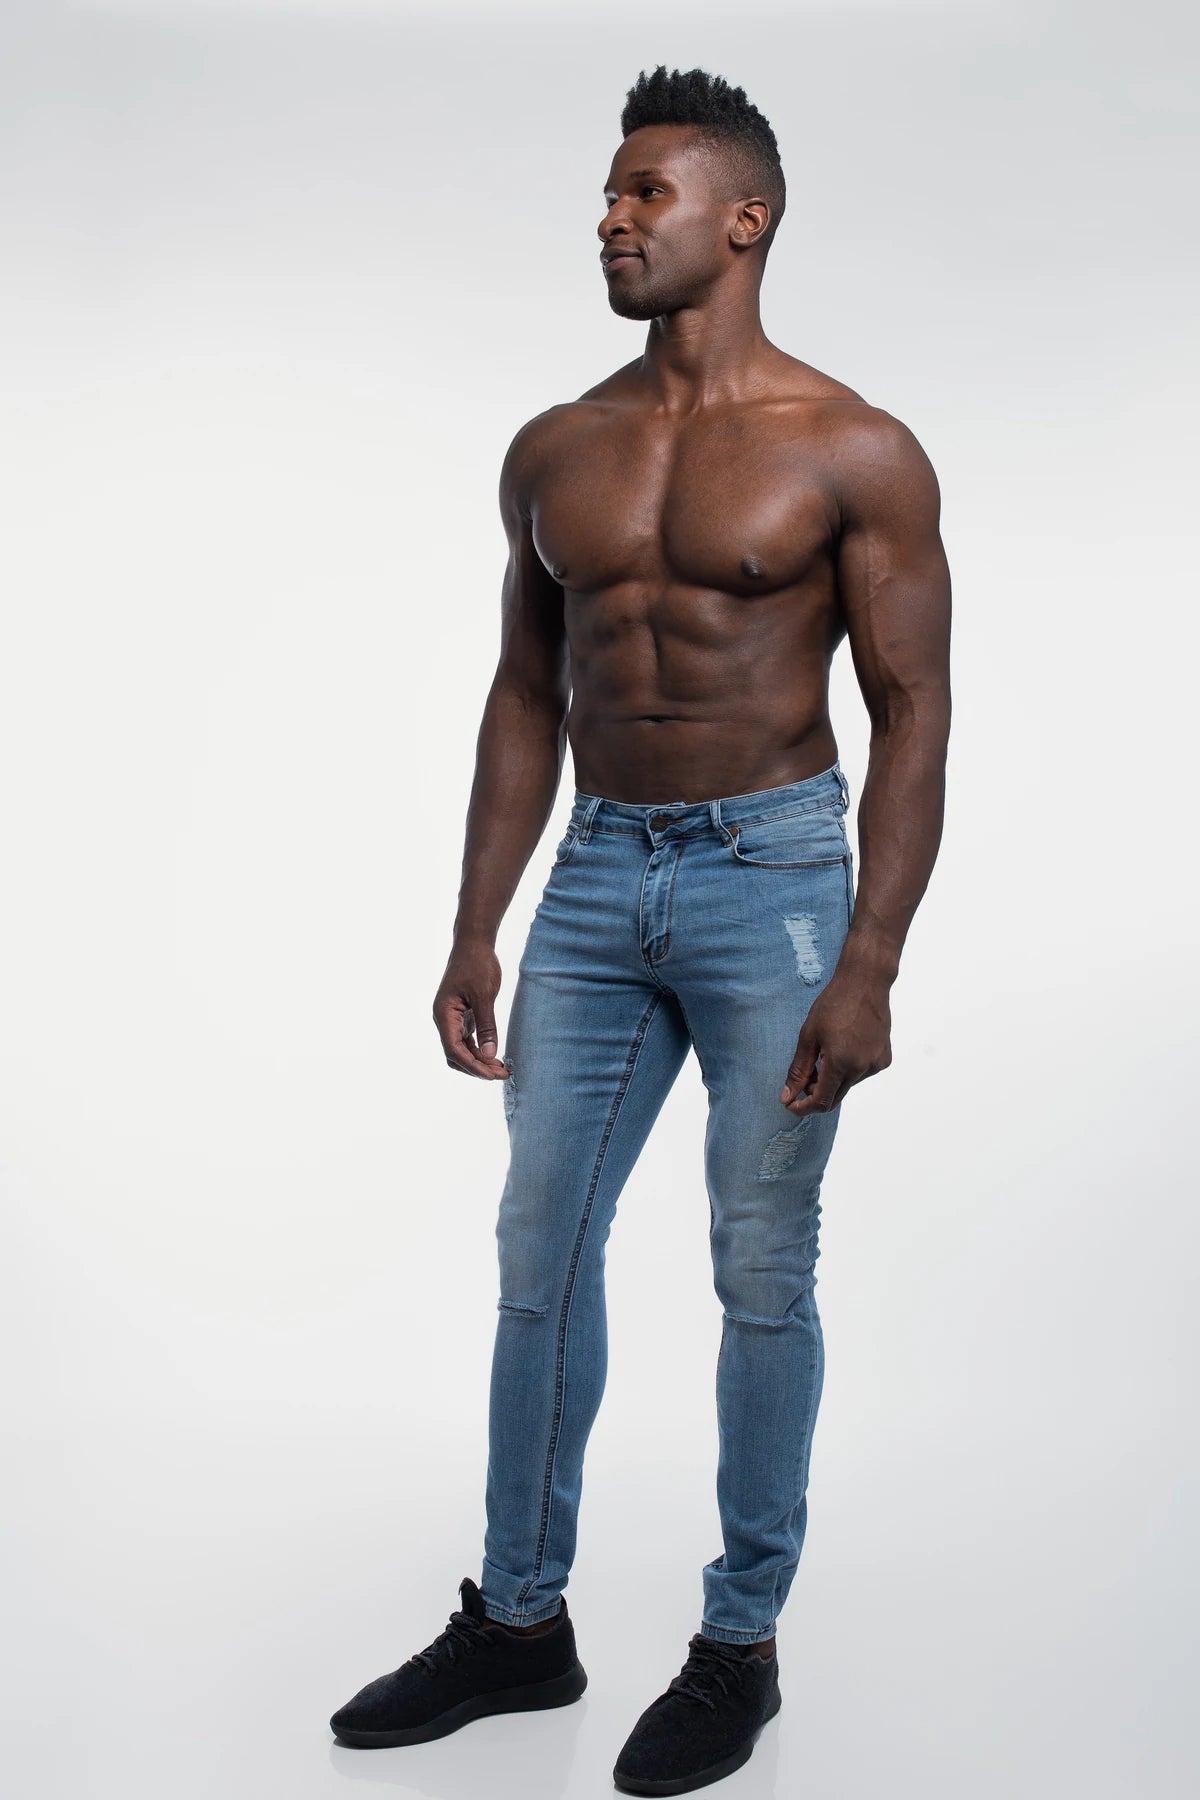 https://barbellapparel.com/cdn/shop/products/barbell-slim-athletic-fit-destroyed-jeans-front-second-angle-light-distressed_1400x.webp?v=1650491985